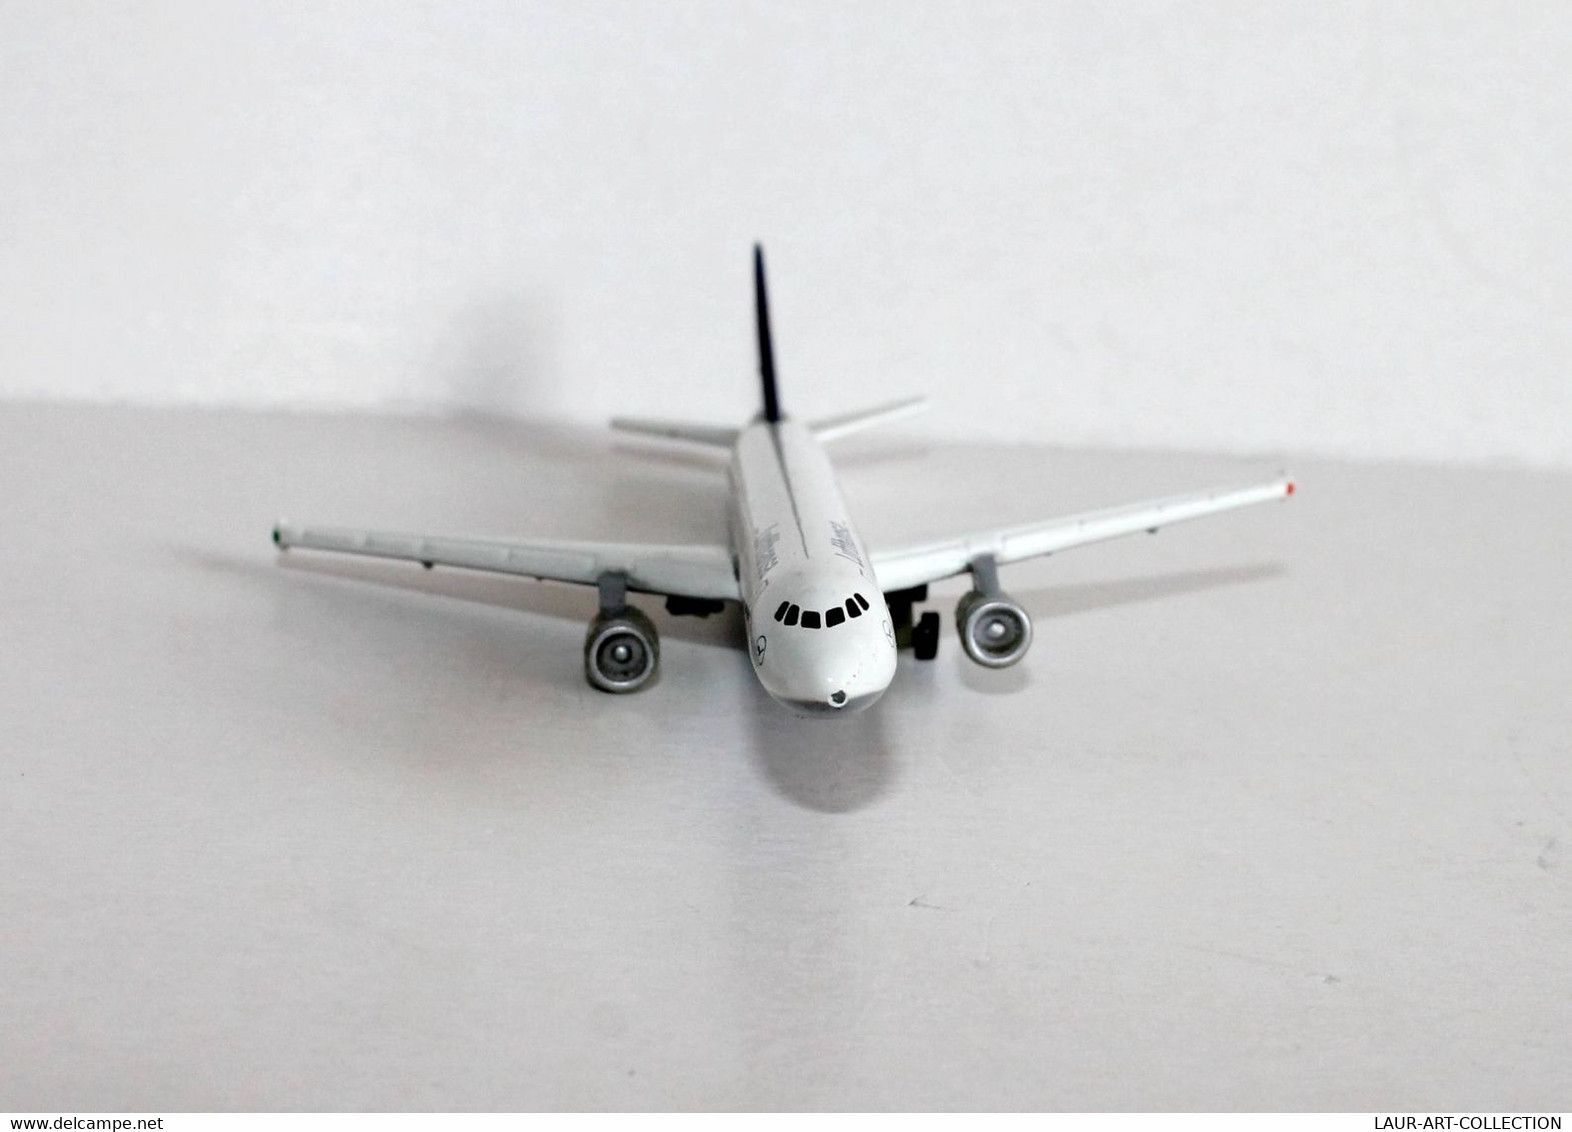 AIRBUS A321-131 – AVION DE LIGNE LUFTHANSA AIRLINES - 1/460 - AIRWAYS AIRPLANE - ANCIEN MODELE AERONEF    (310821.10) - Airplanes & Helicopters